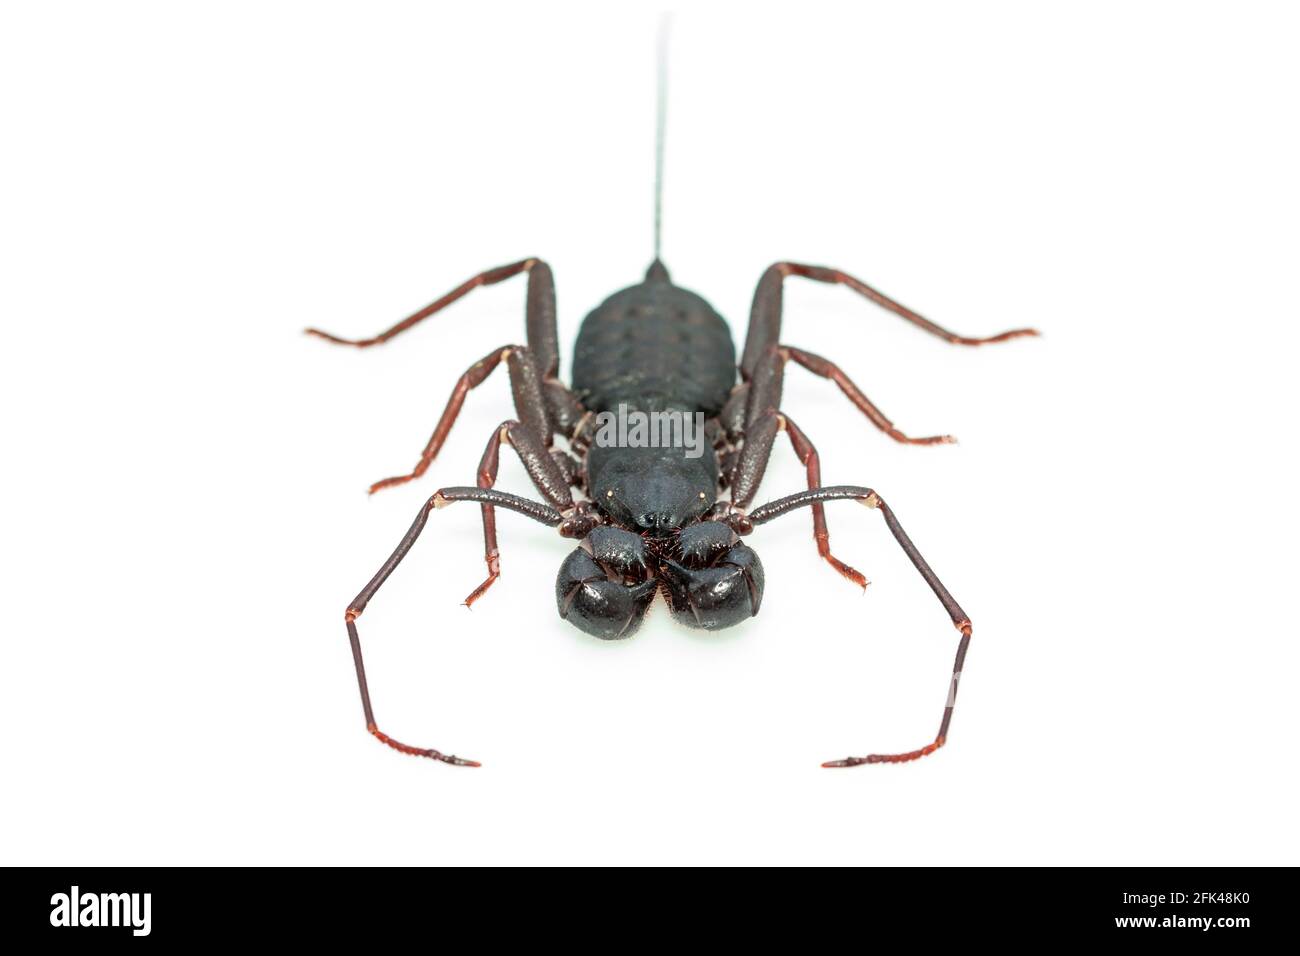 Image of whip scorpion isolated on white background. Animal. Insect. Stock Photo